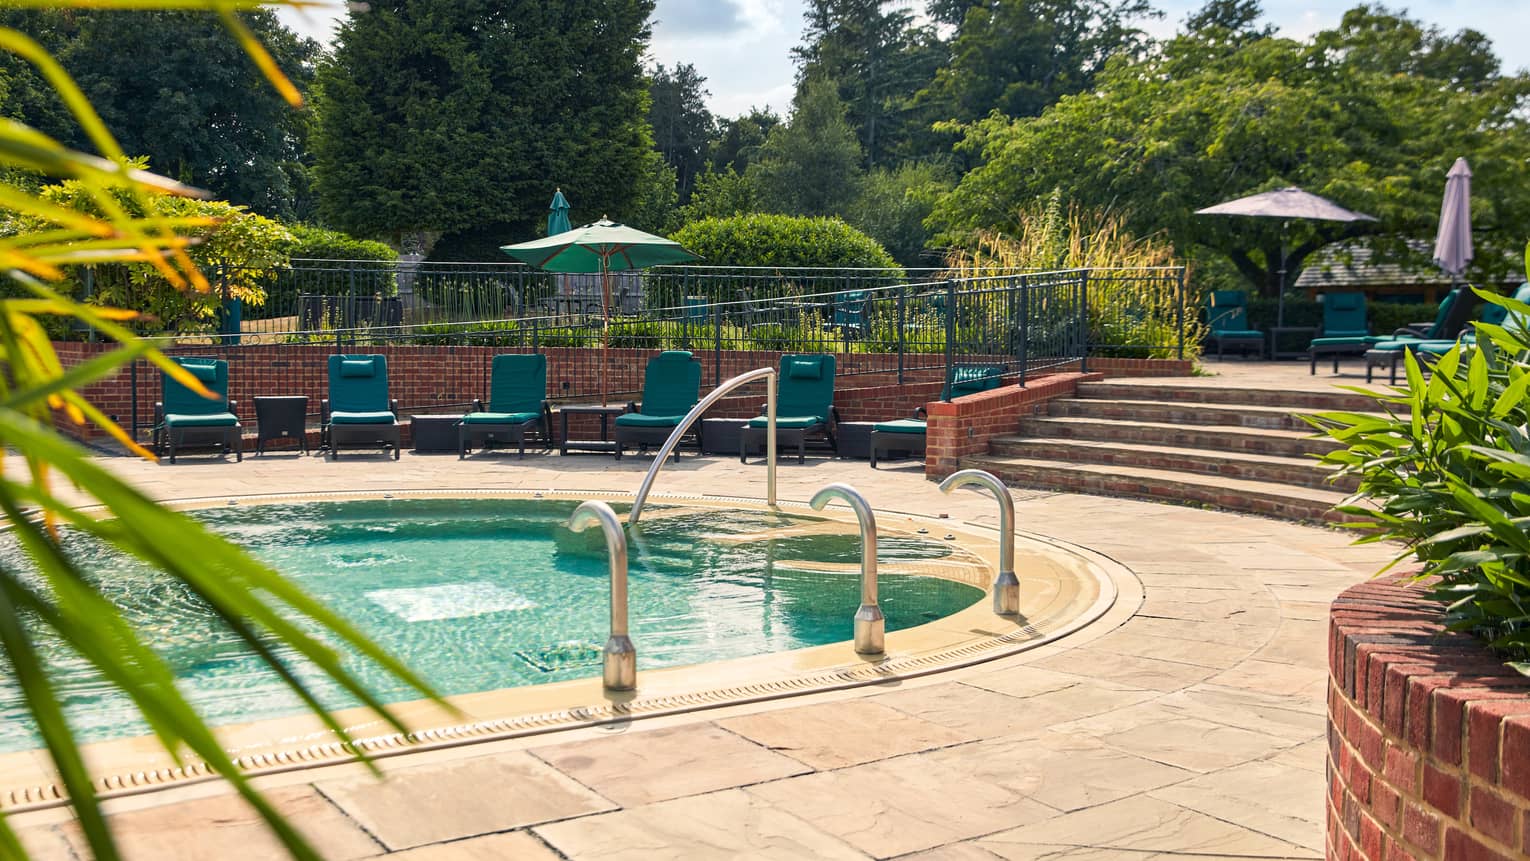 Outdoor pool with flagstone surround, green lounge chairs and stairs leading up to area with umbrellas